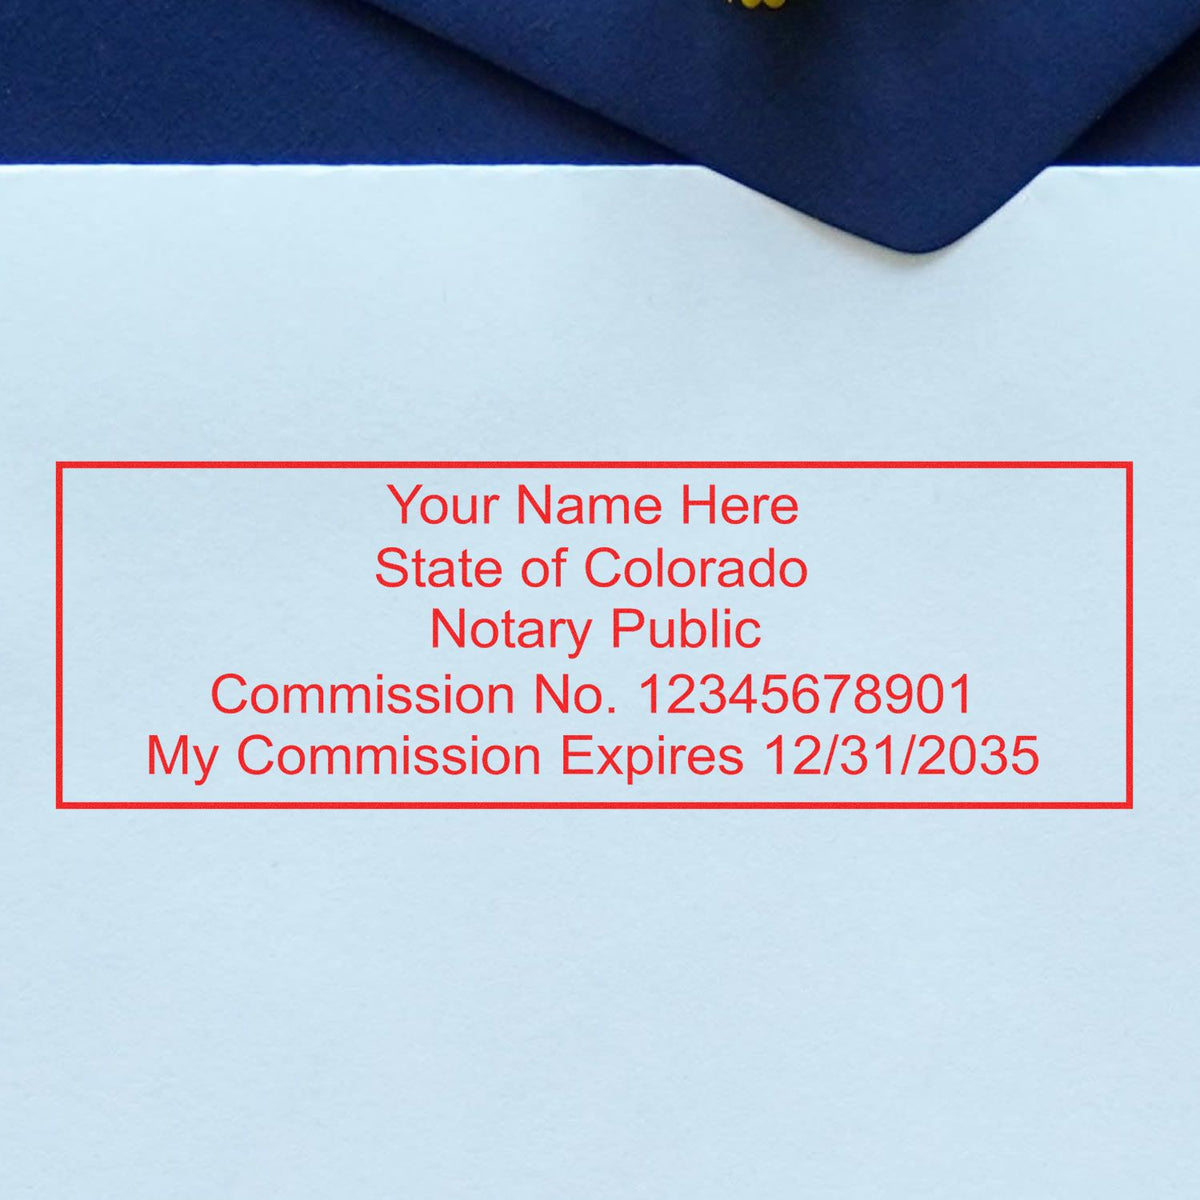 The Self-Inking Rectangular Colorado Notary Stamp stamp impression comes to life with a crisp, detailed photo on paper - showcasing true professional quality.